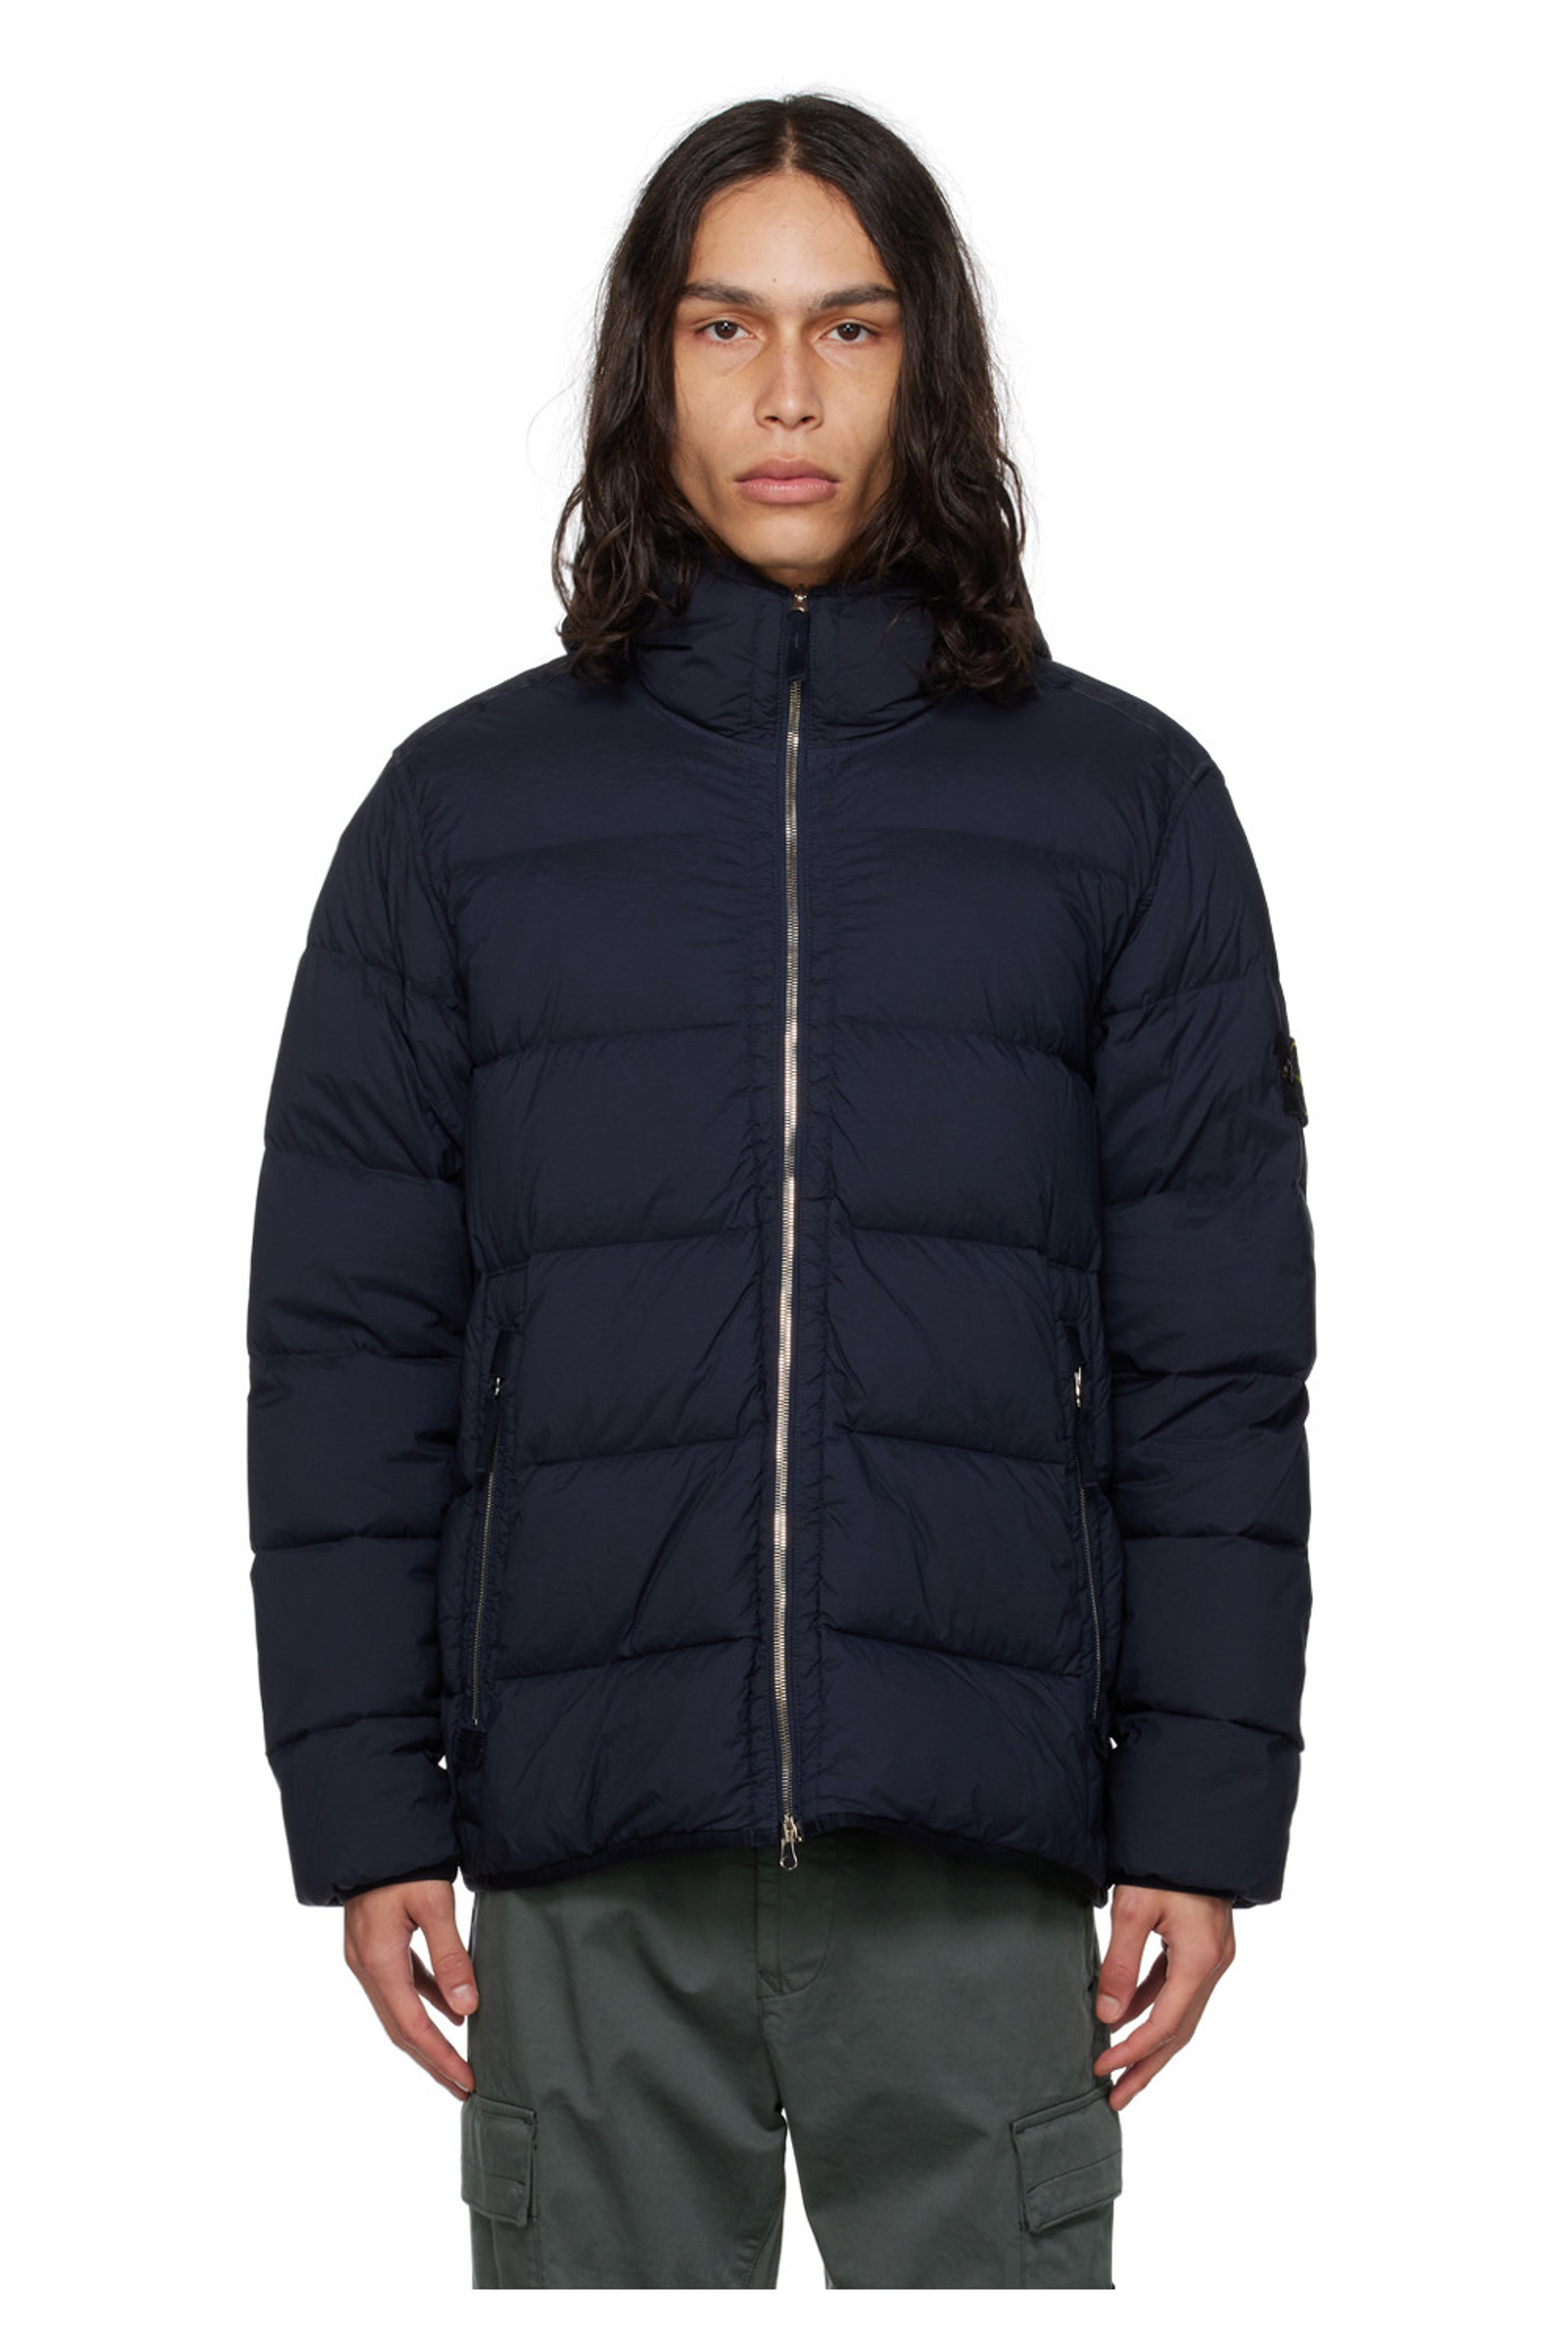 Navy Seamless Tunnel Down Jacket by Stone Island on Sale